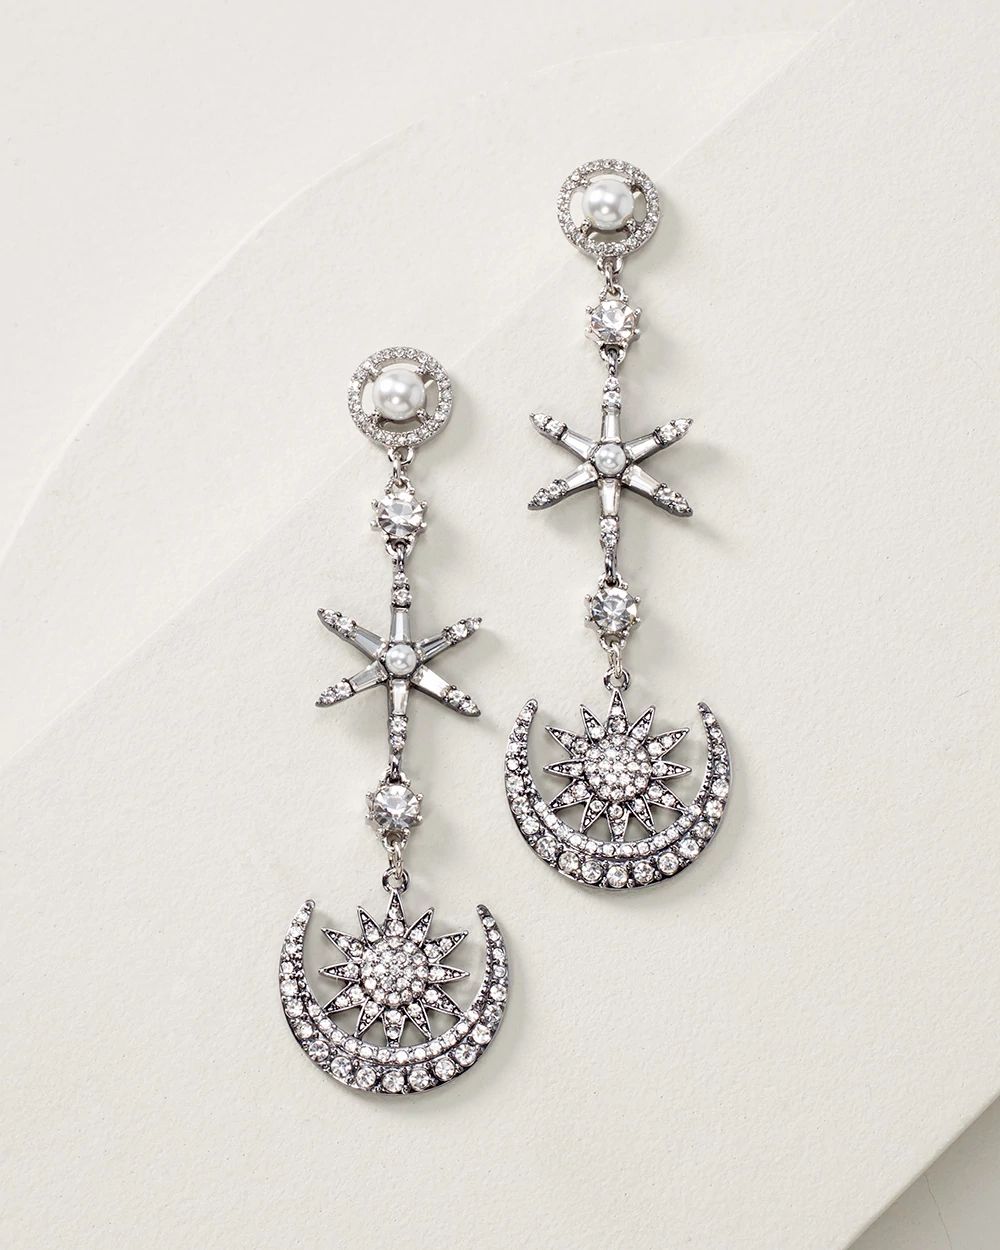 Crystal Celestial Linear Earrings click to view larger image.